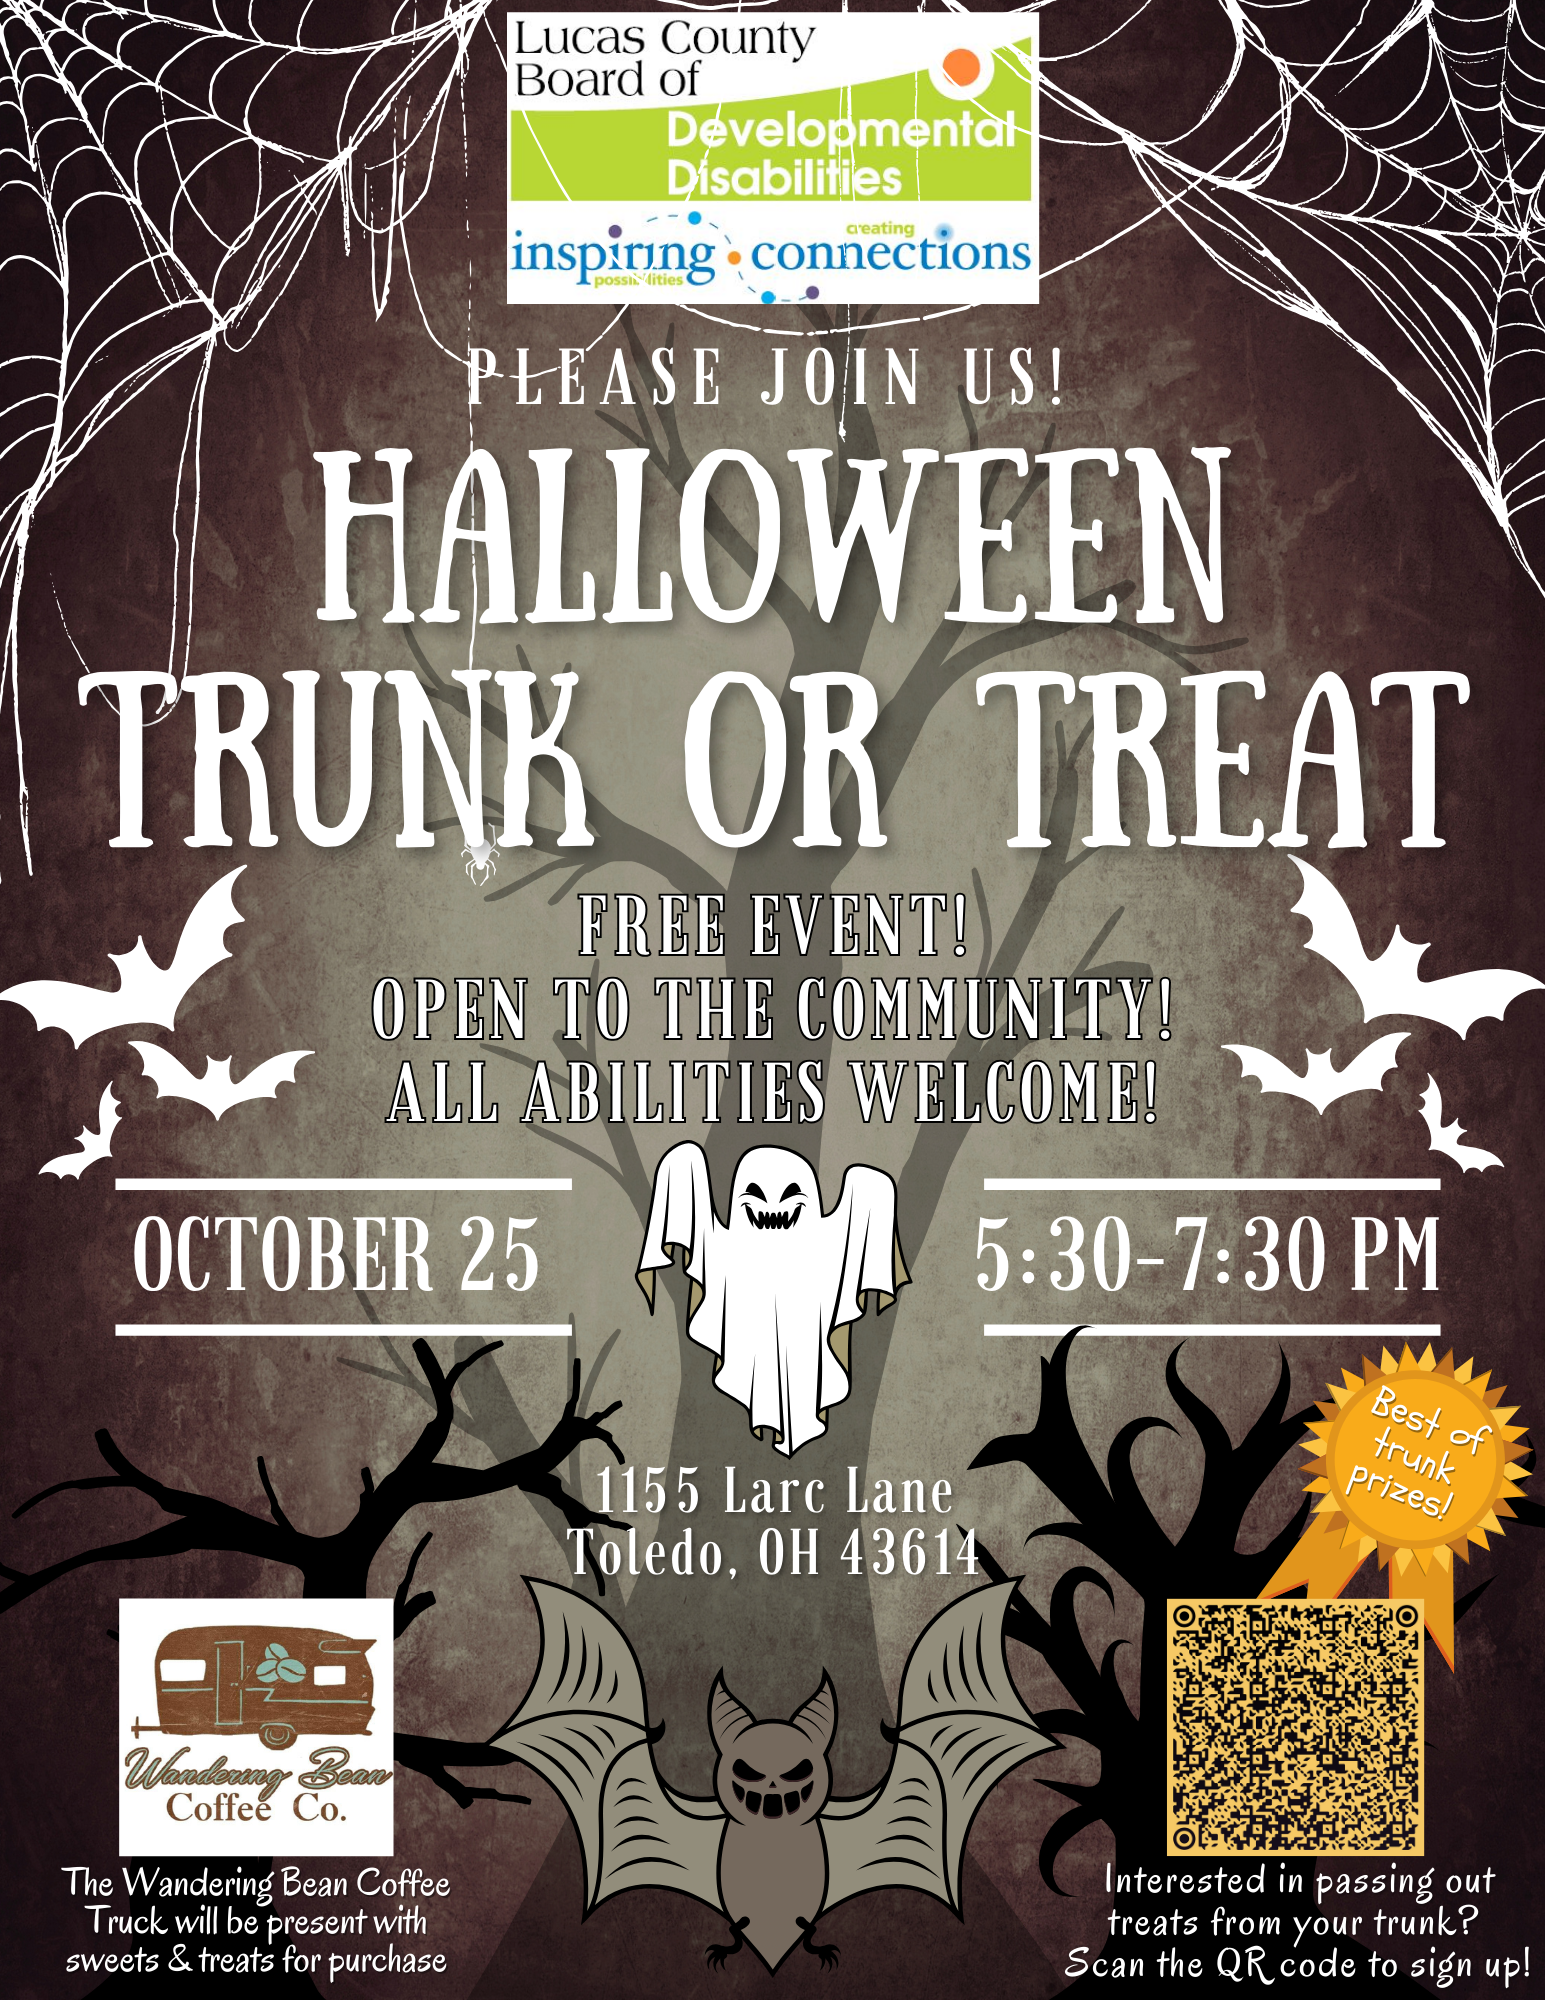 Trunk or Treat flyer with spooky graphics